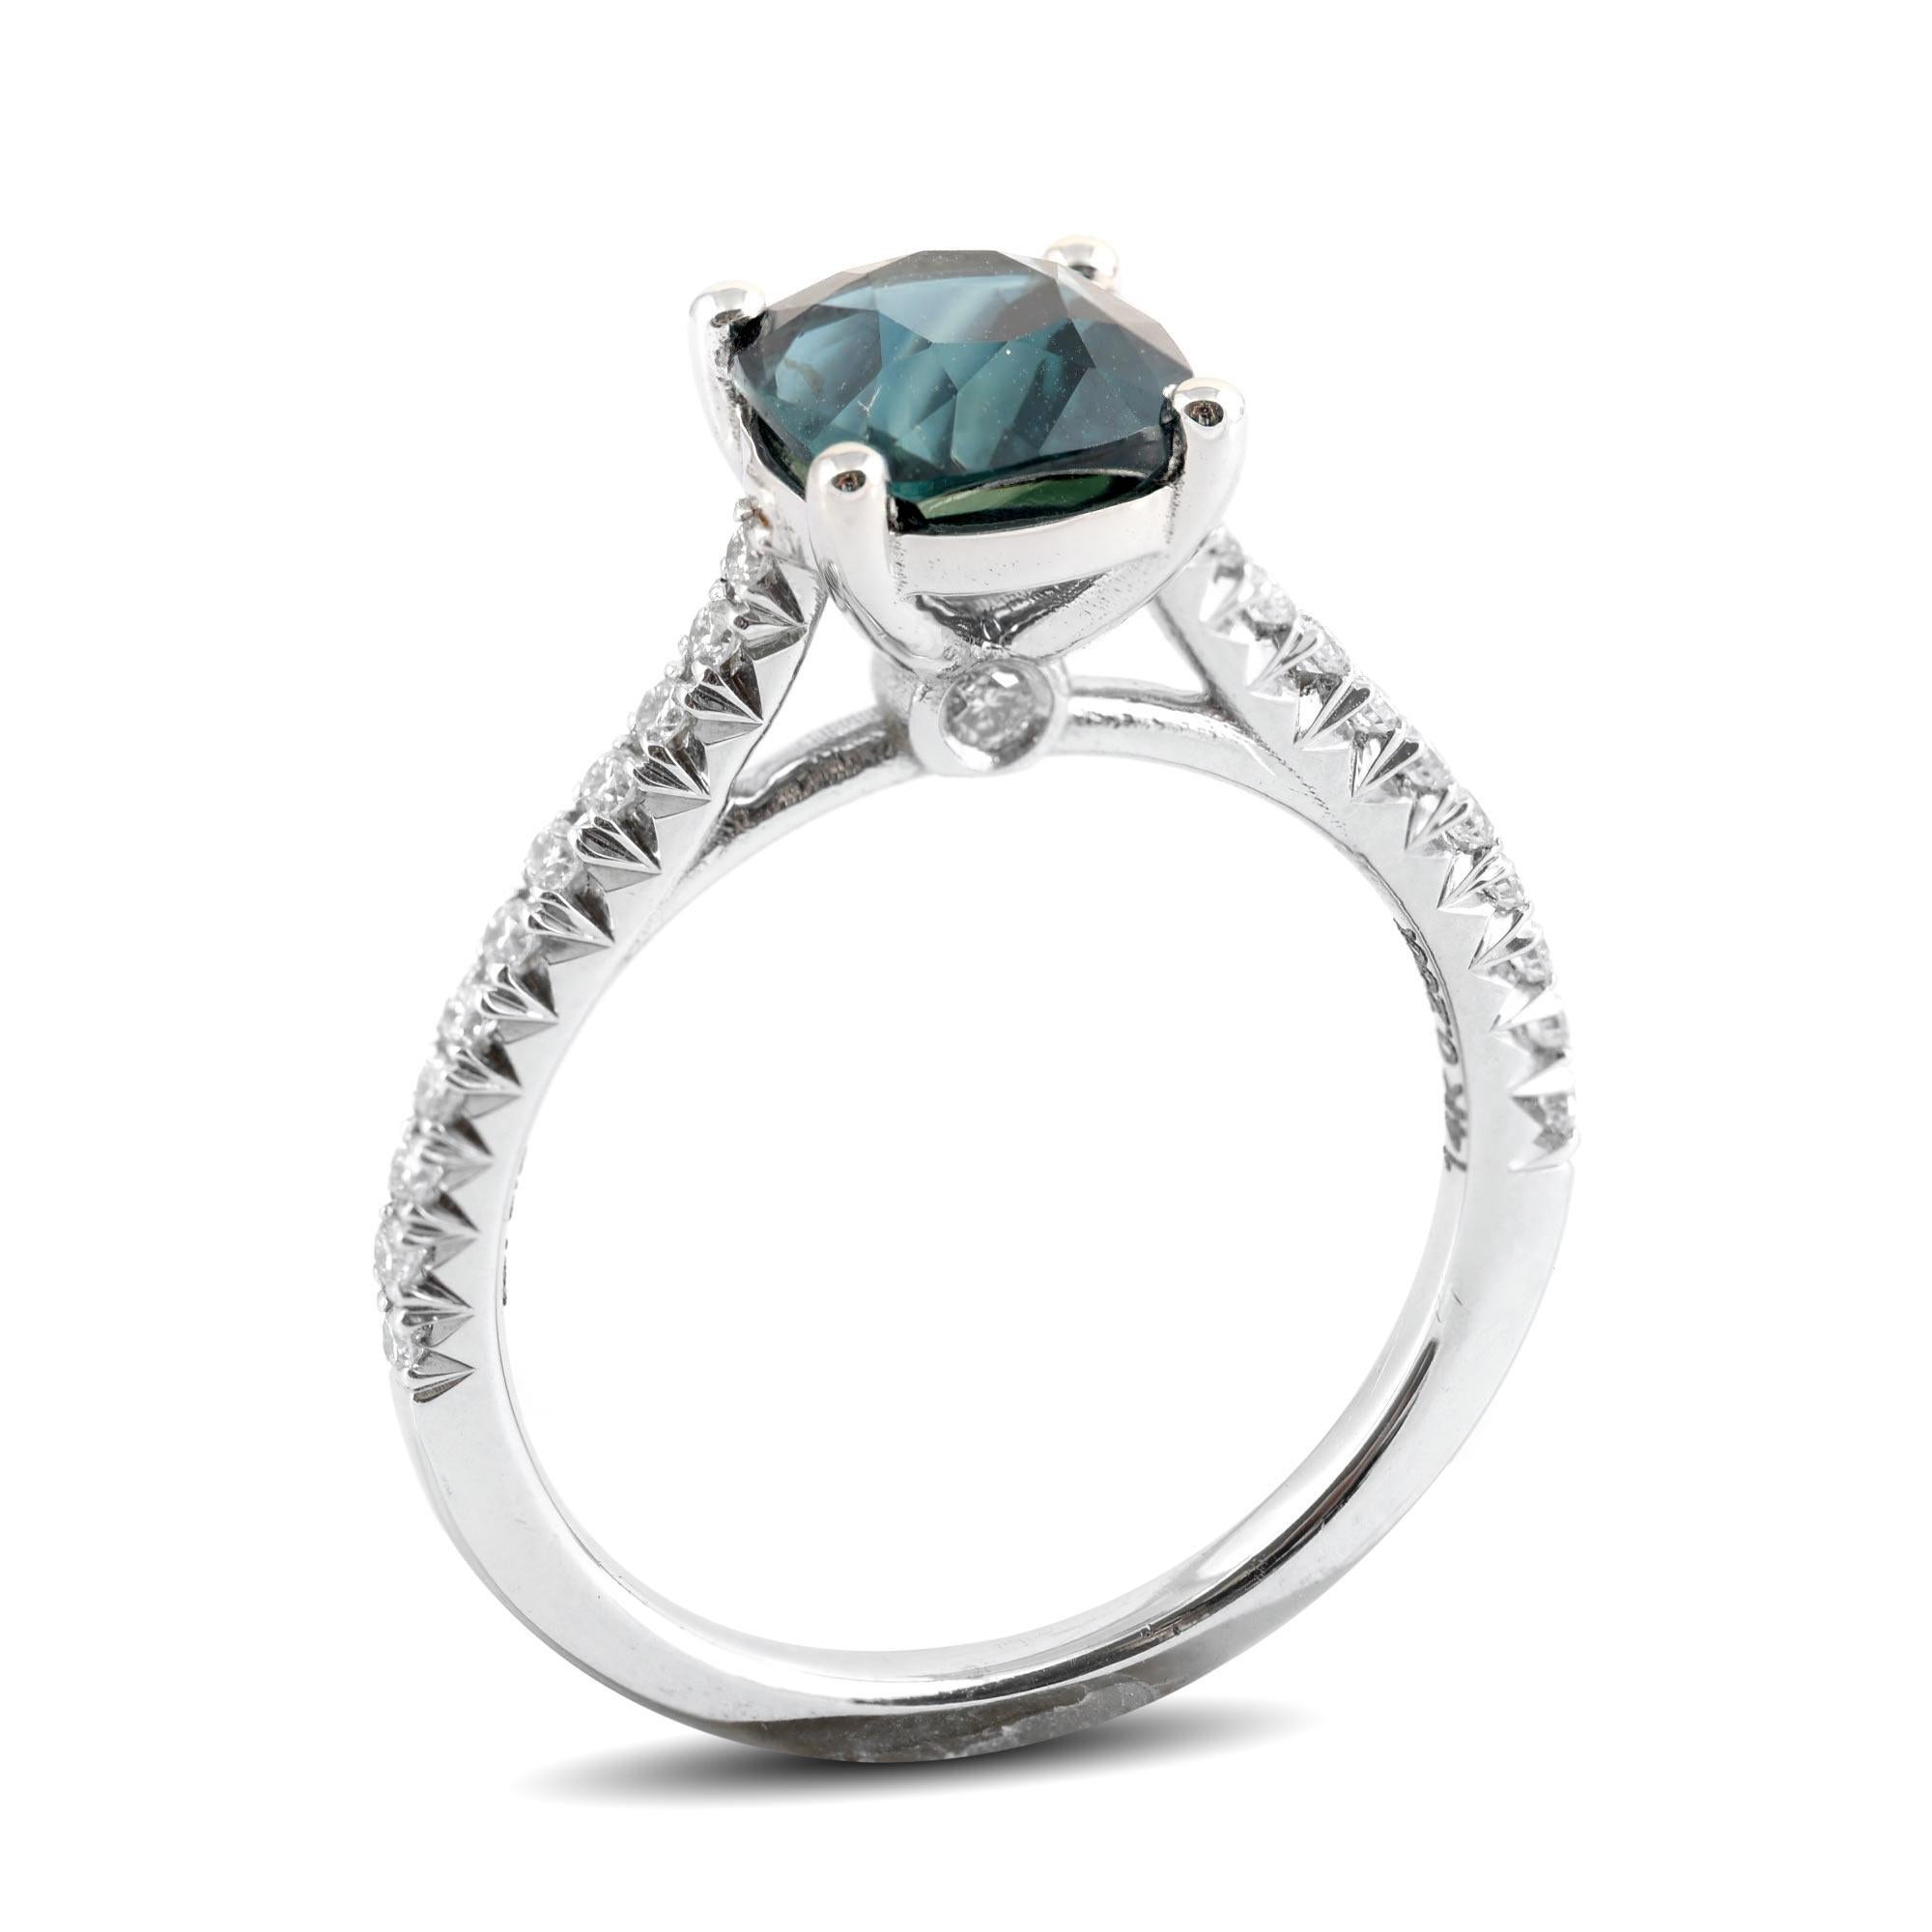 Crafted to perfection, this bluish green sapphire has a delicate blend of color making it an elegant choice for an engagement ring. Cut as a cushion, weighing 2.31 carats, the gemstone boasts a deep tone paired with a lustrous internal sparkle that